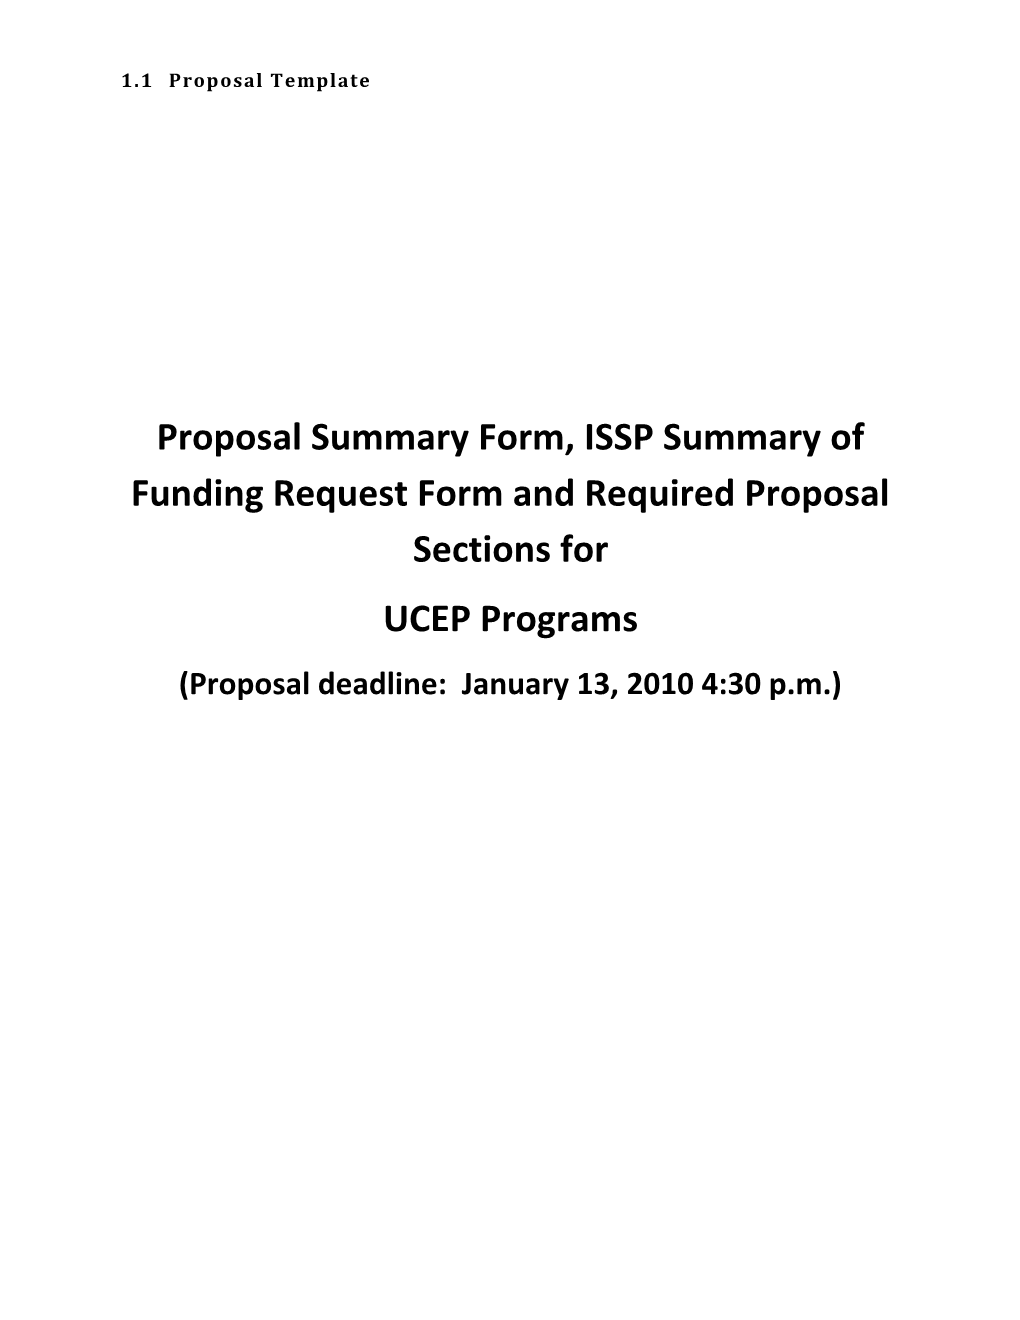 Proposal Summary Form, ISSP Summary of Funding Request Form and Required Proposal Sections For